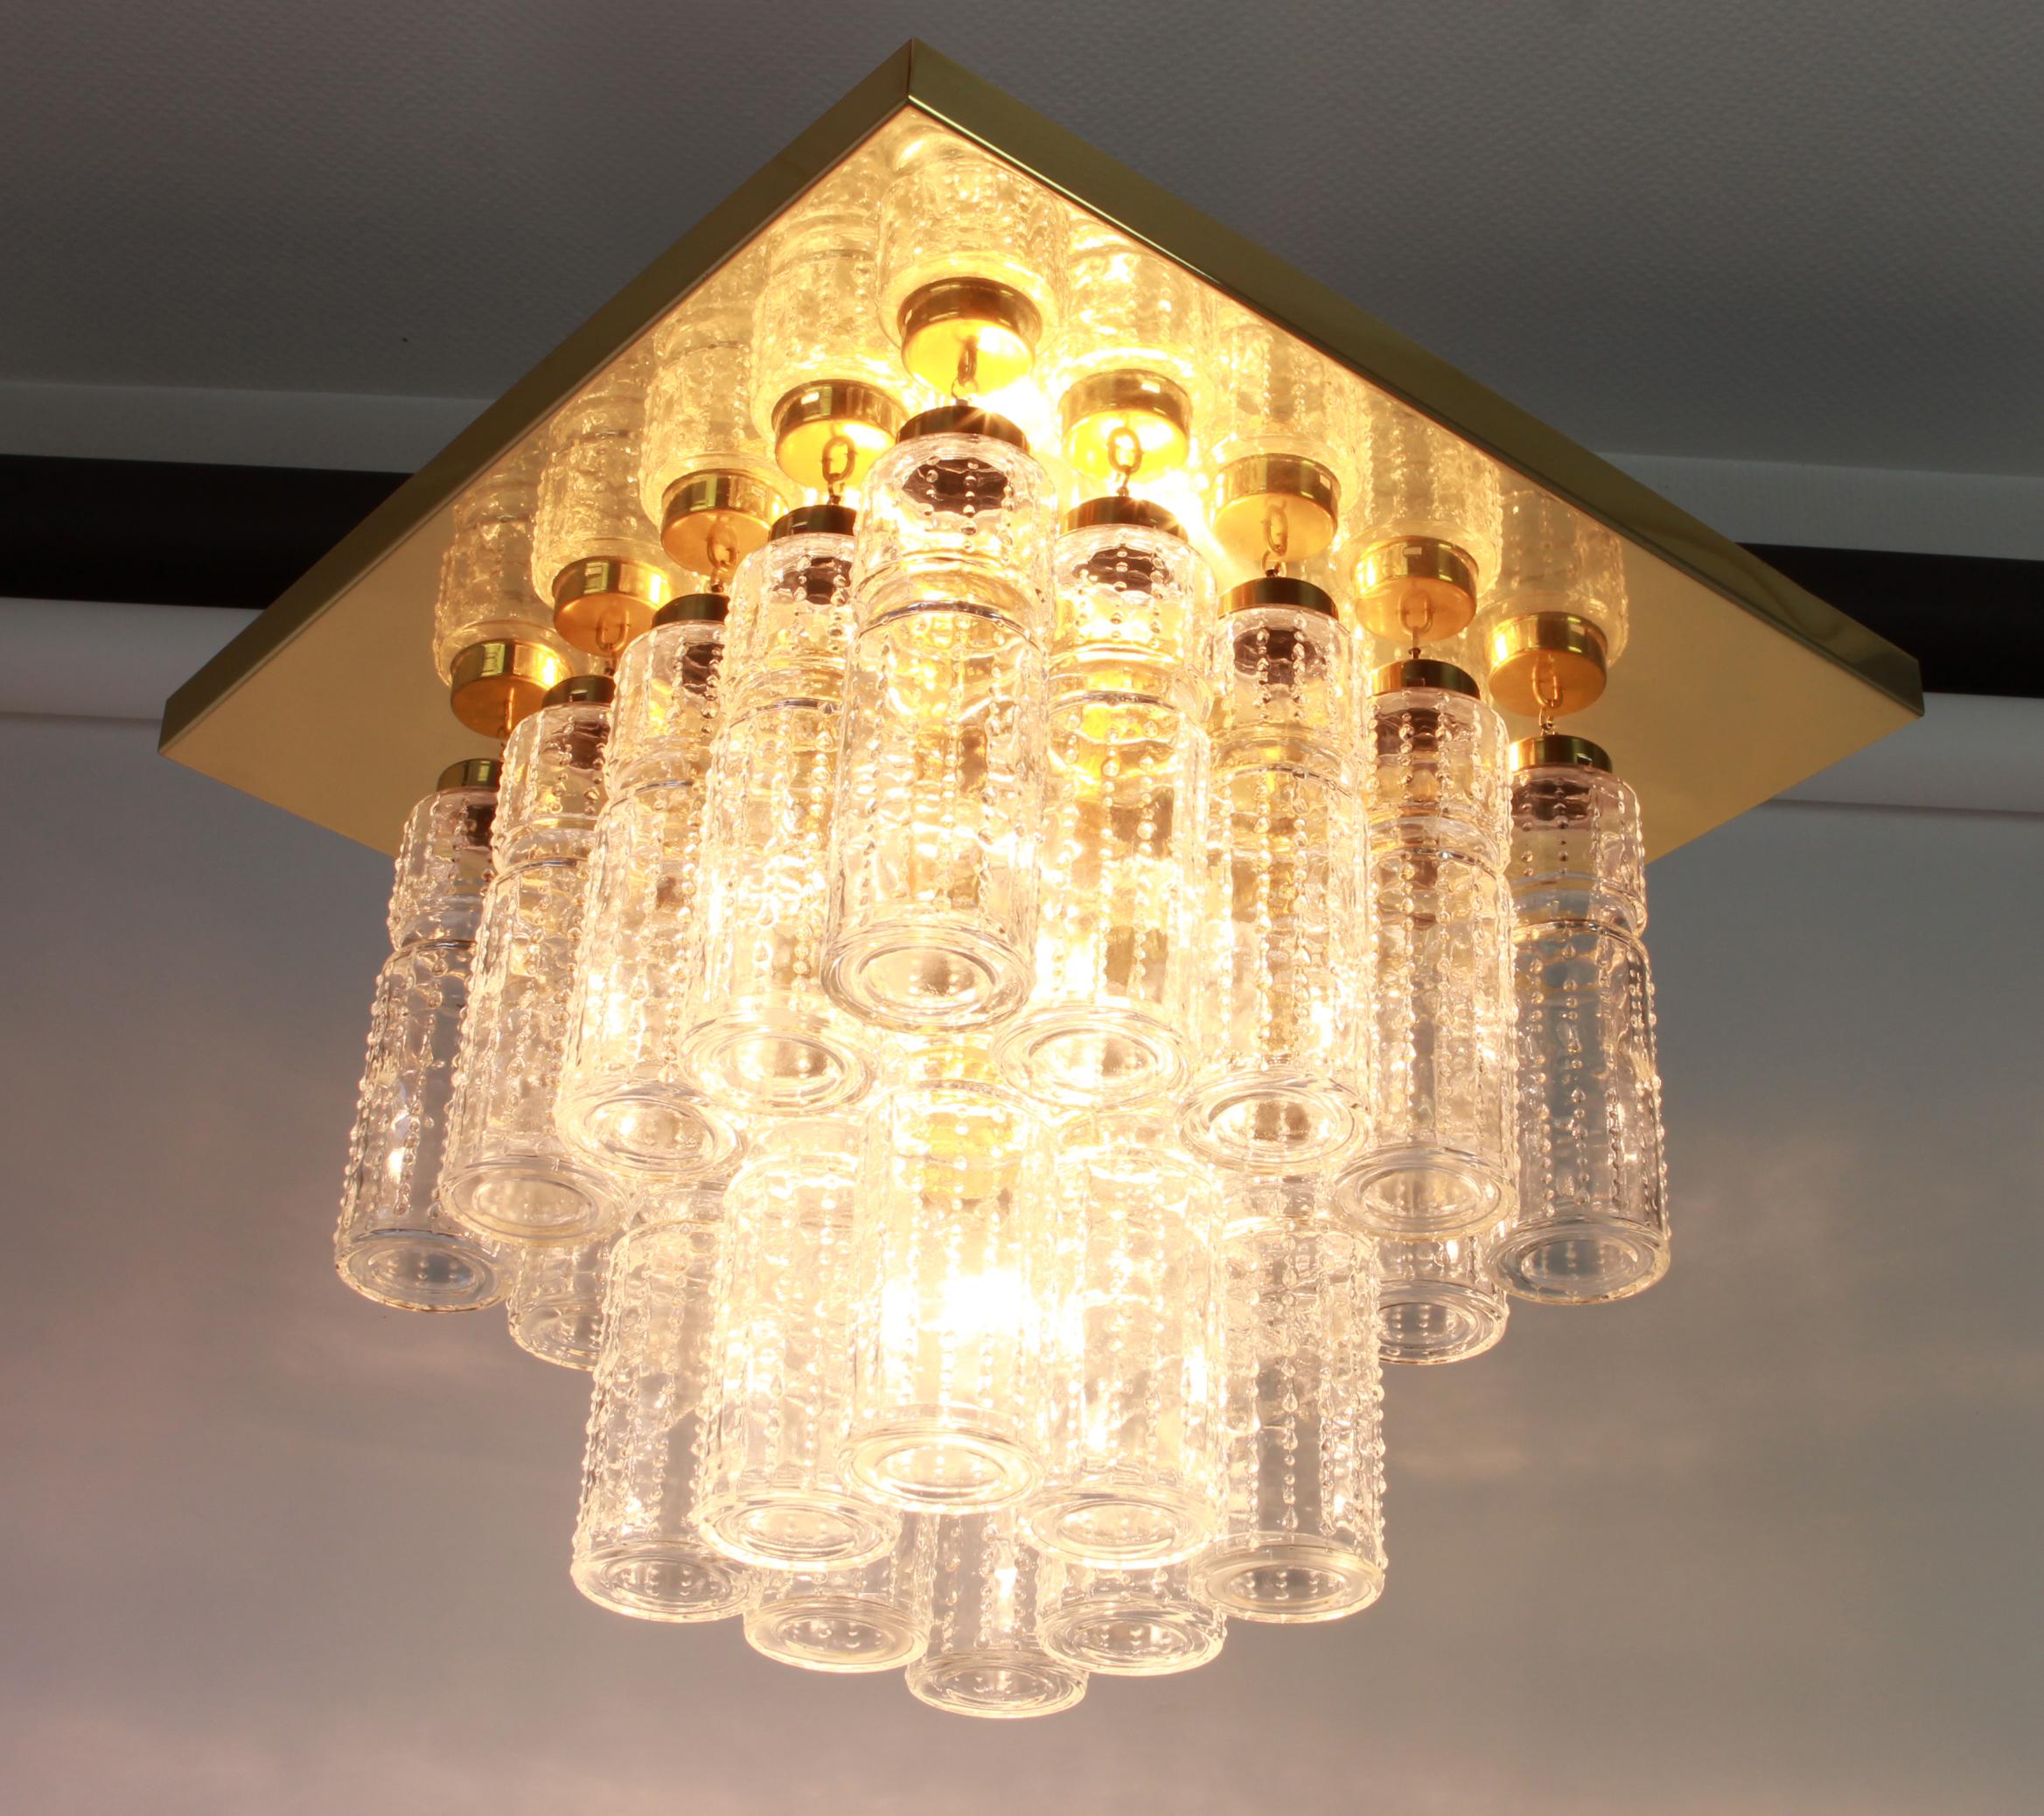 Rare two-tier flush mount or chandelier with hand blown glass pieces on a brass base made by Glashütte Limburg.

Heavy quality and in very good condition. Cleaned, well-wired and ready to use. The fixture requires 5 x E27 Standard bulbs with 60W